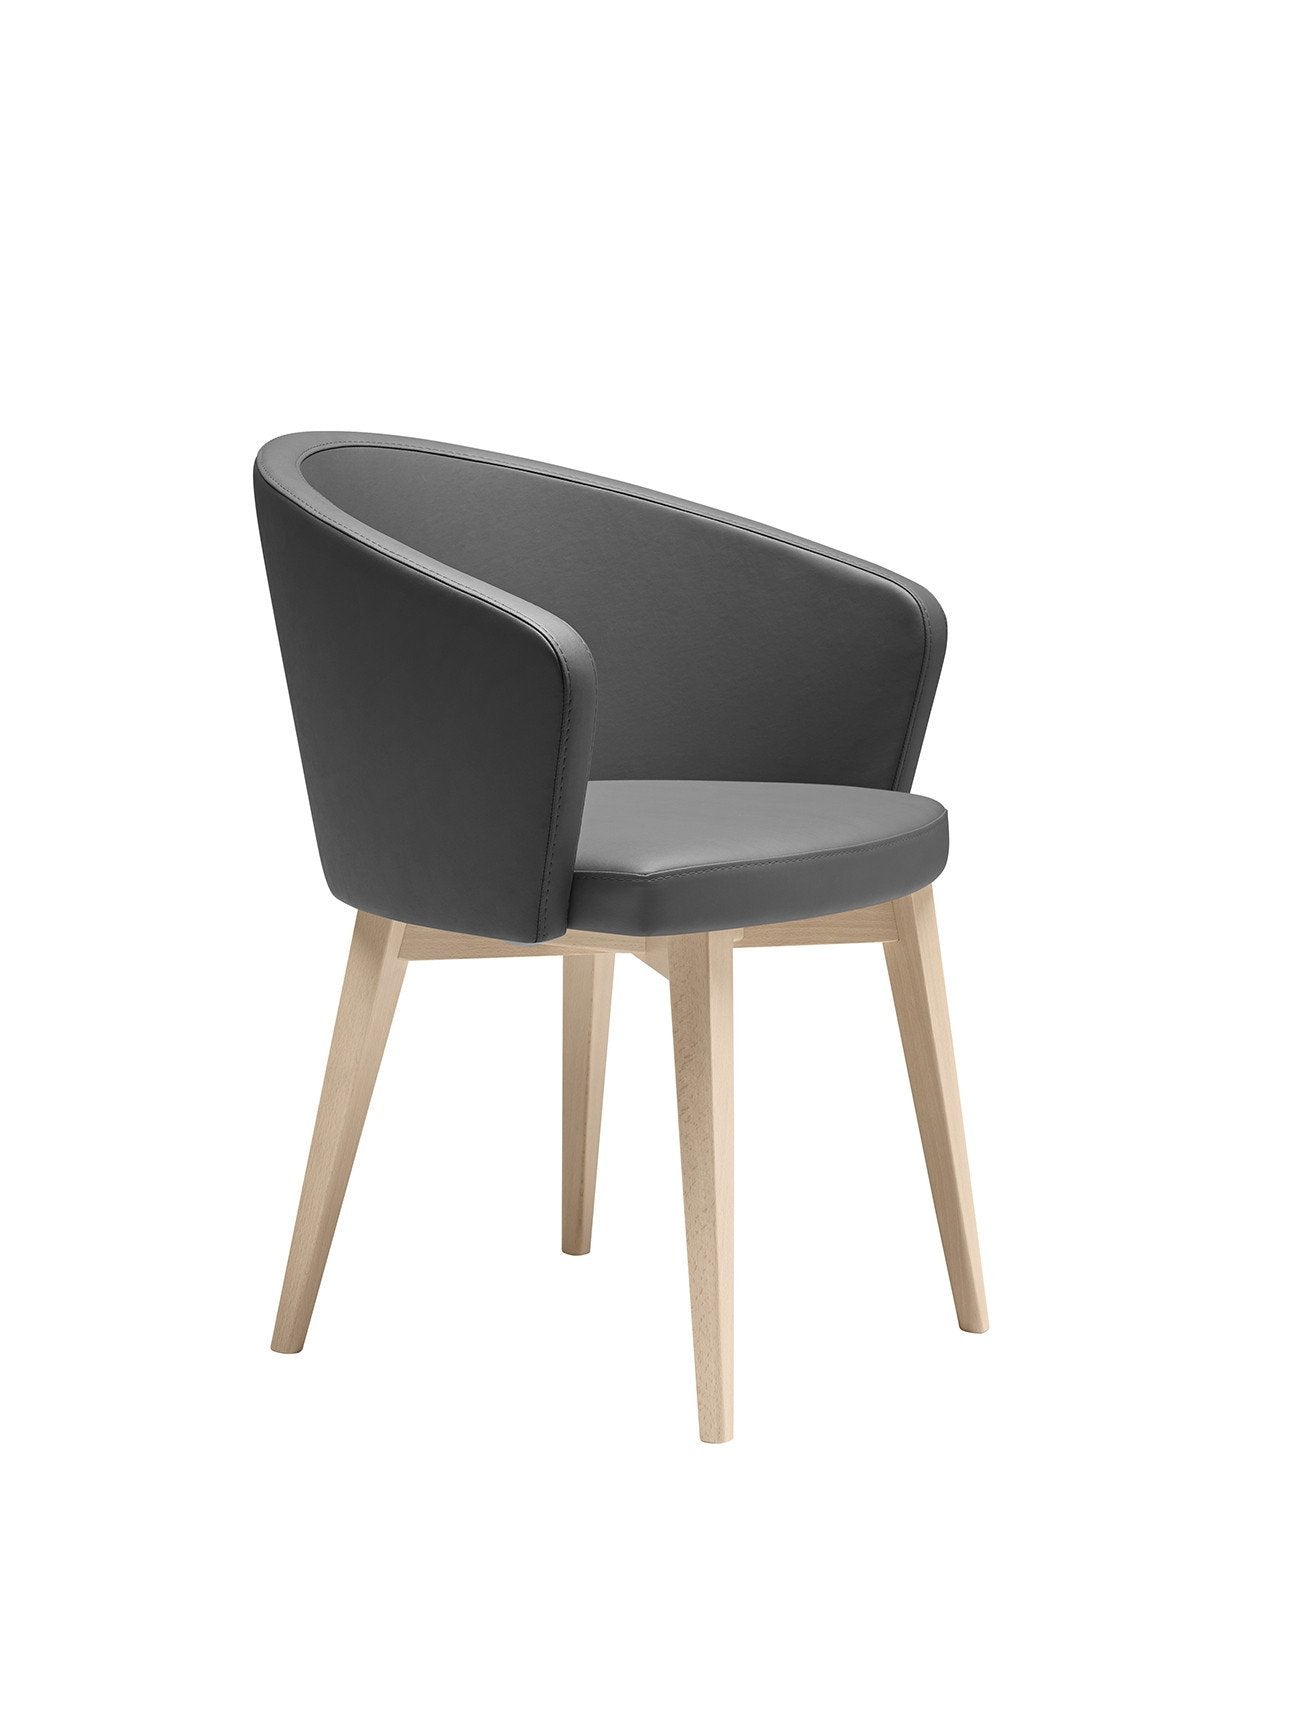 Kicca Armchair c/w Wood Legs-Metalmobil-Contract Furniture Store